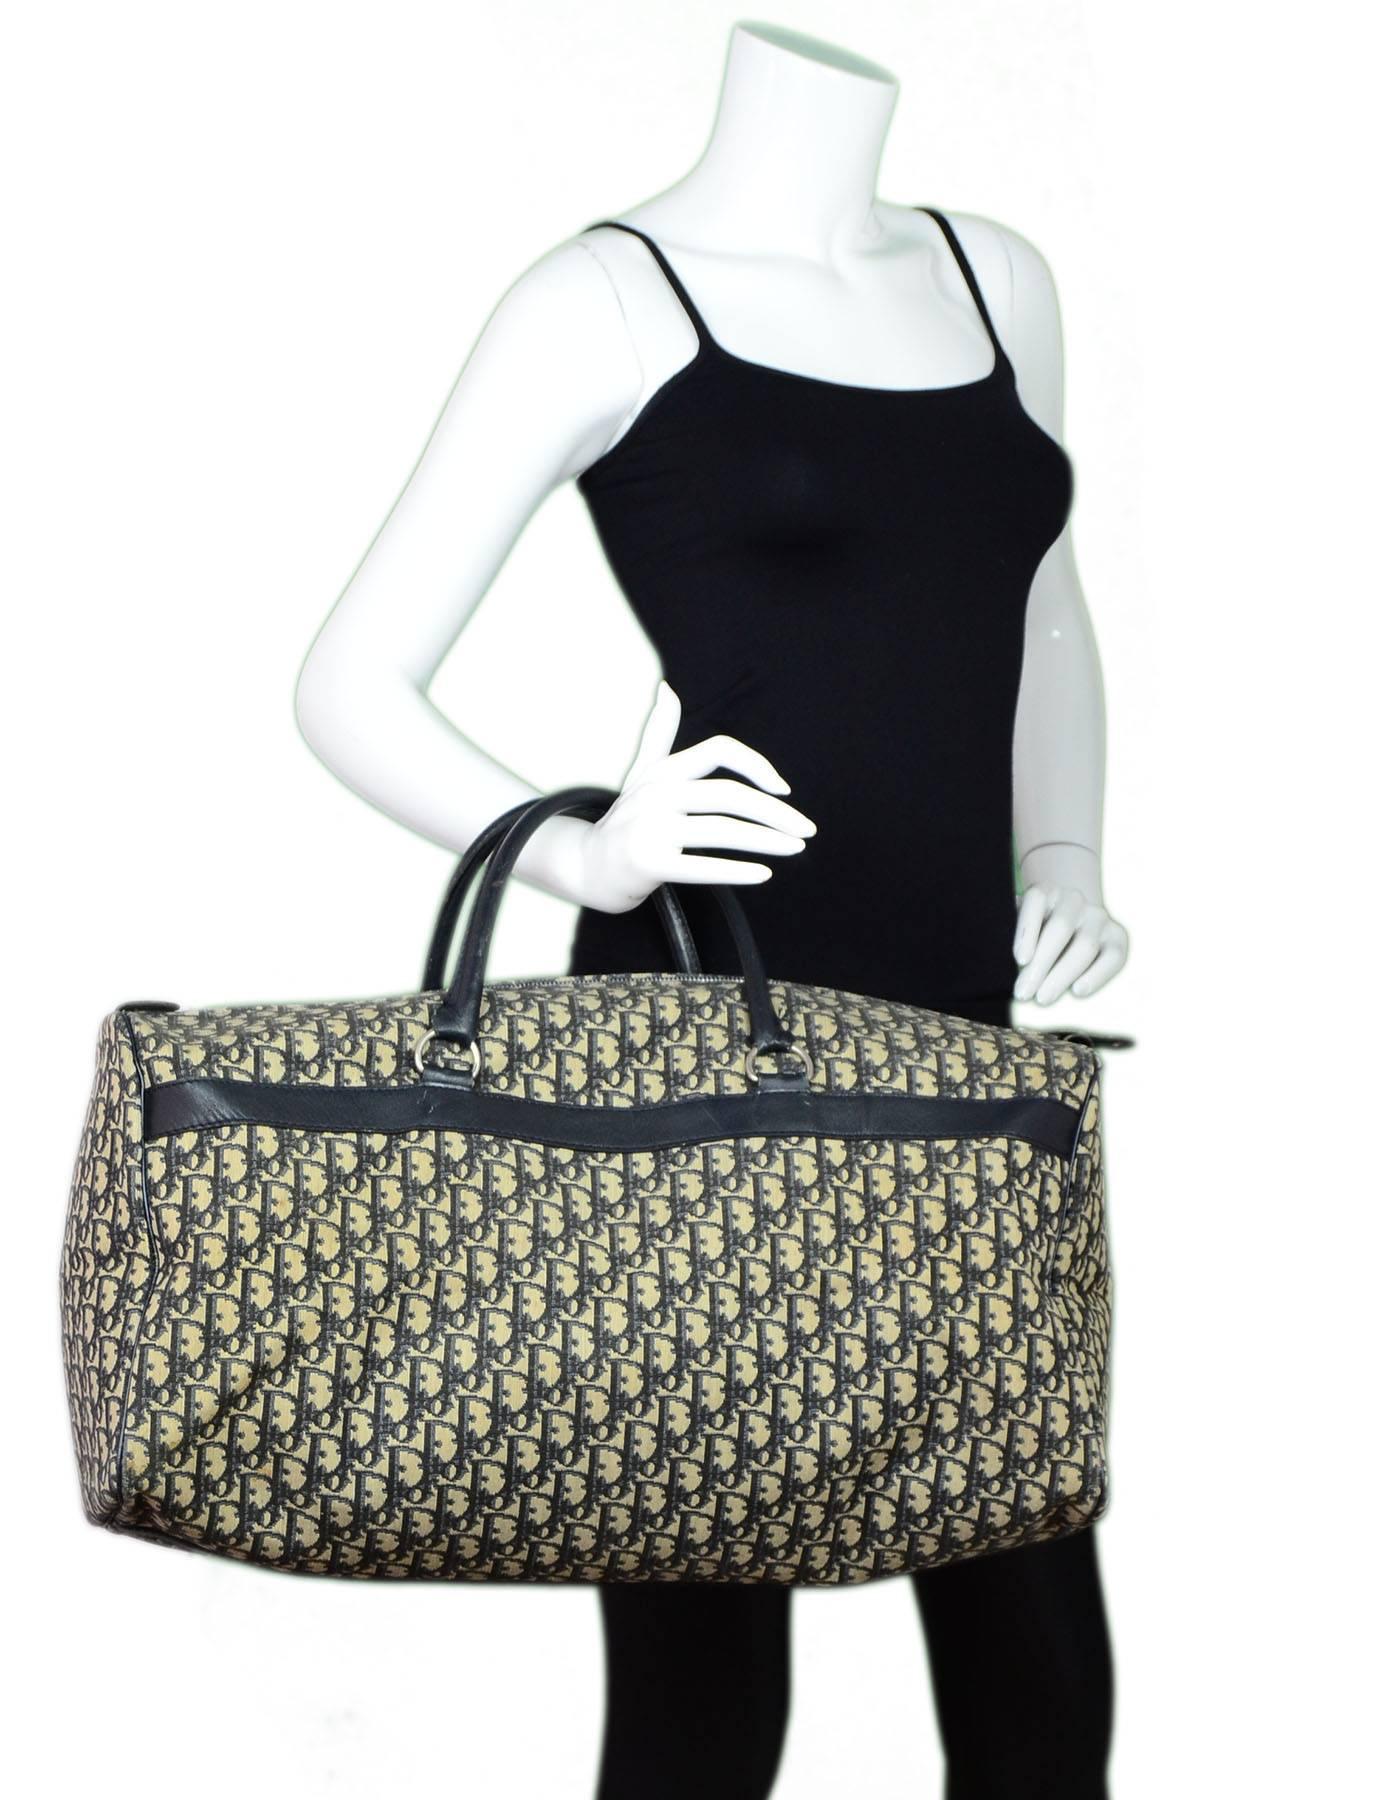 Dior Vintage Navy & Beige Monogram Canvas Boston Duffel Bag 
Features leather trim and piping throughout exterior

Made In: France
Color: Blue and beige
Hardware: Silvertone
Materials: Canvas and leather
Lining: Dark navy vinyl
Closure/Opening: Zip